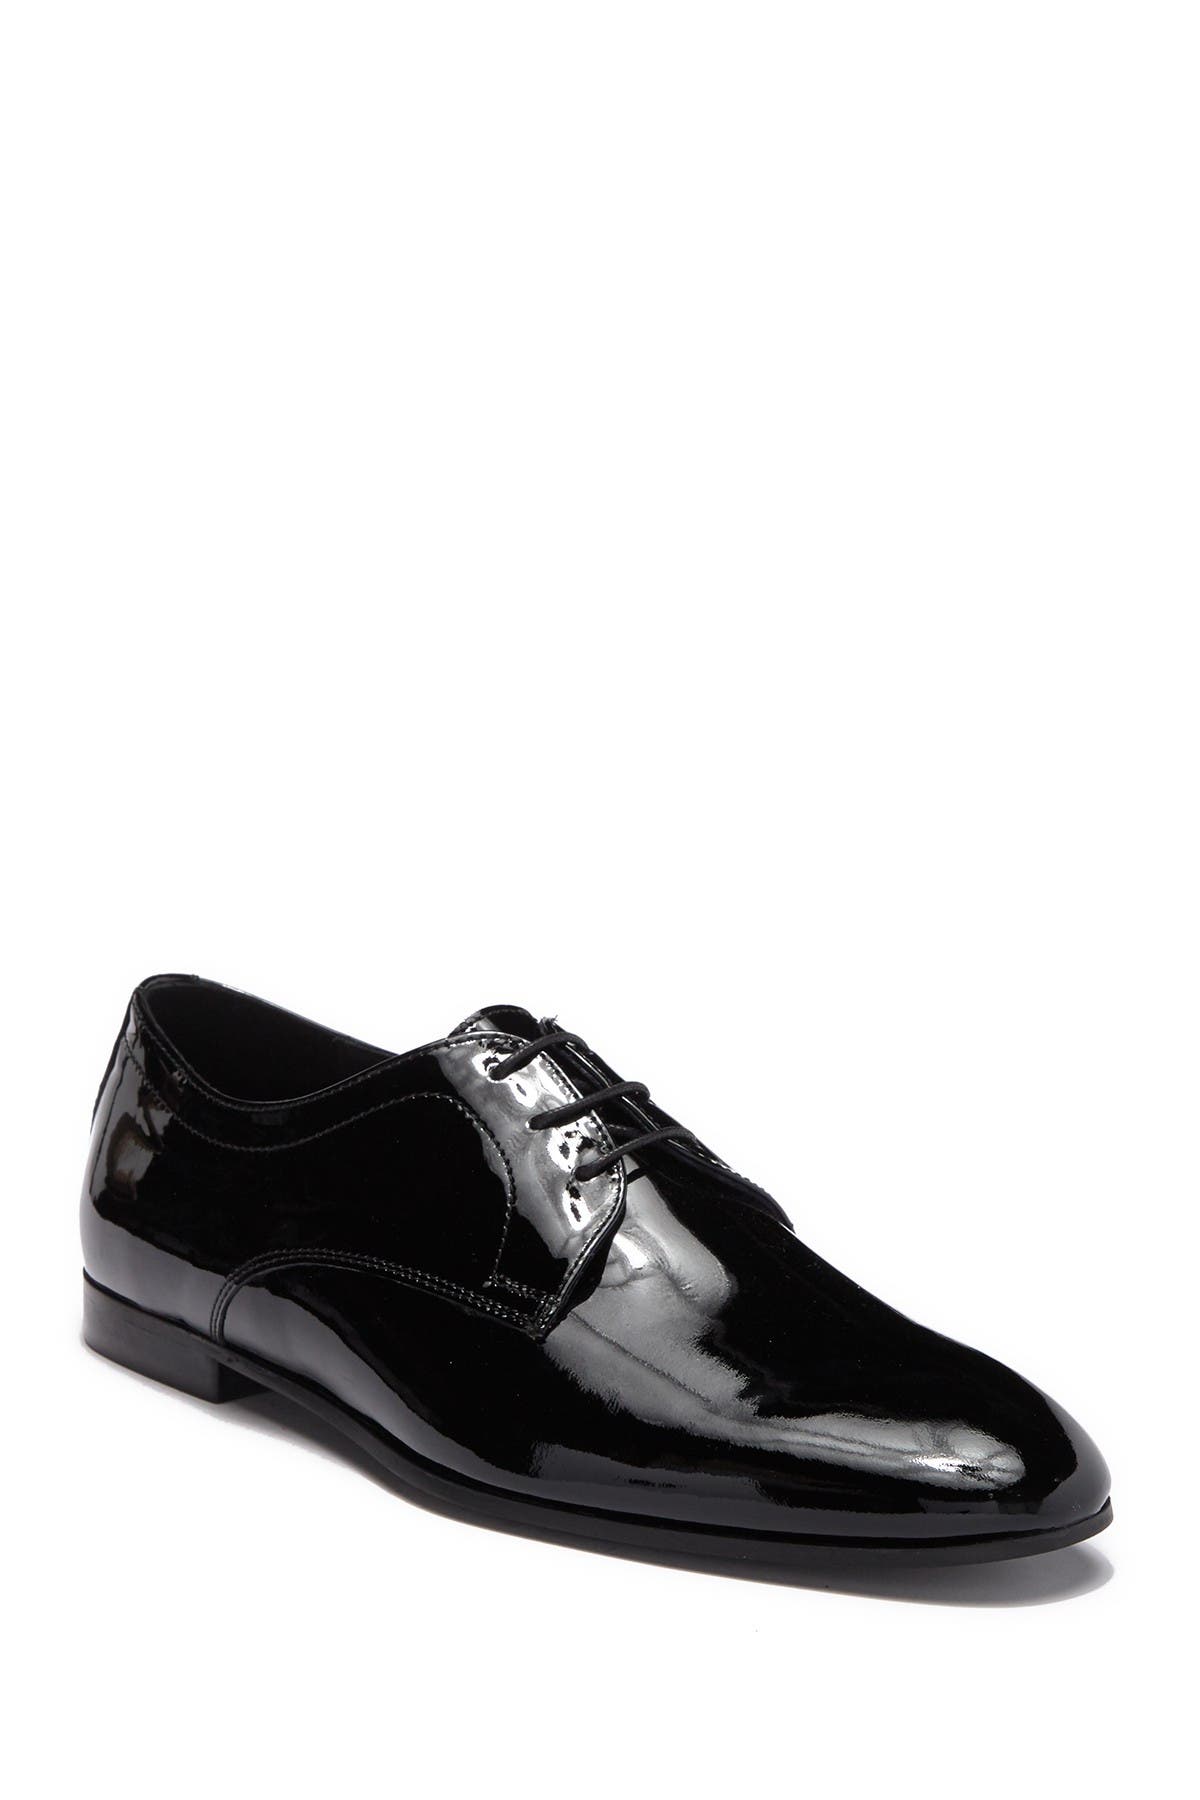 nordstrom rack patent leather shoes